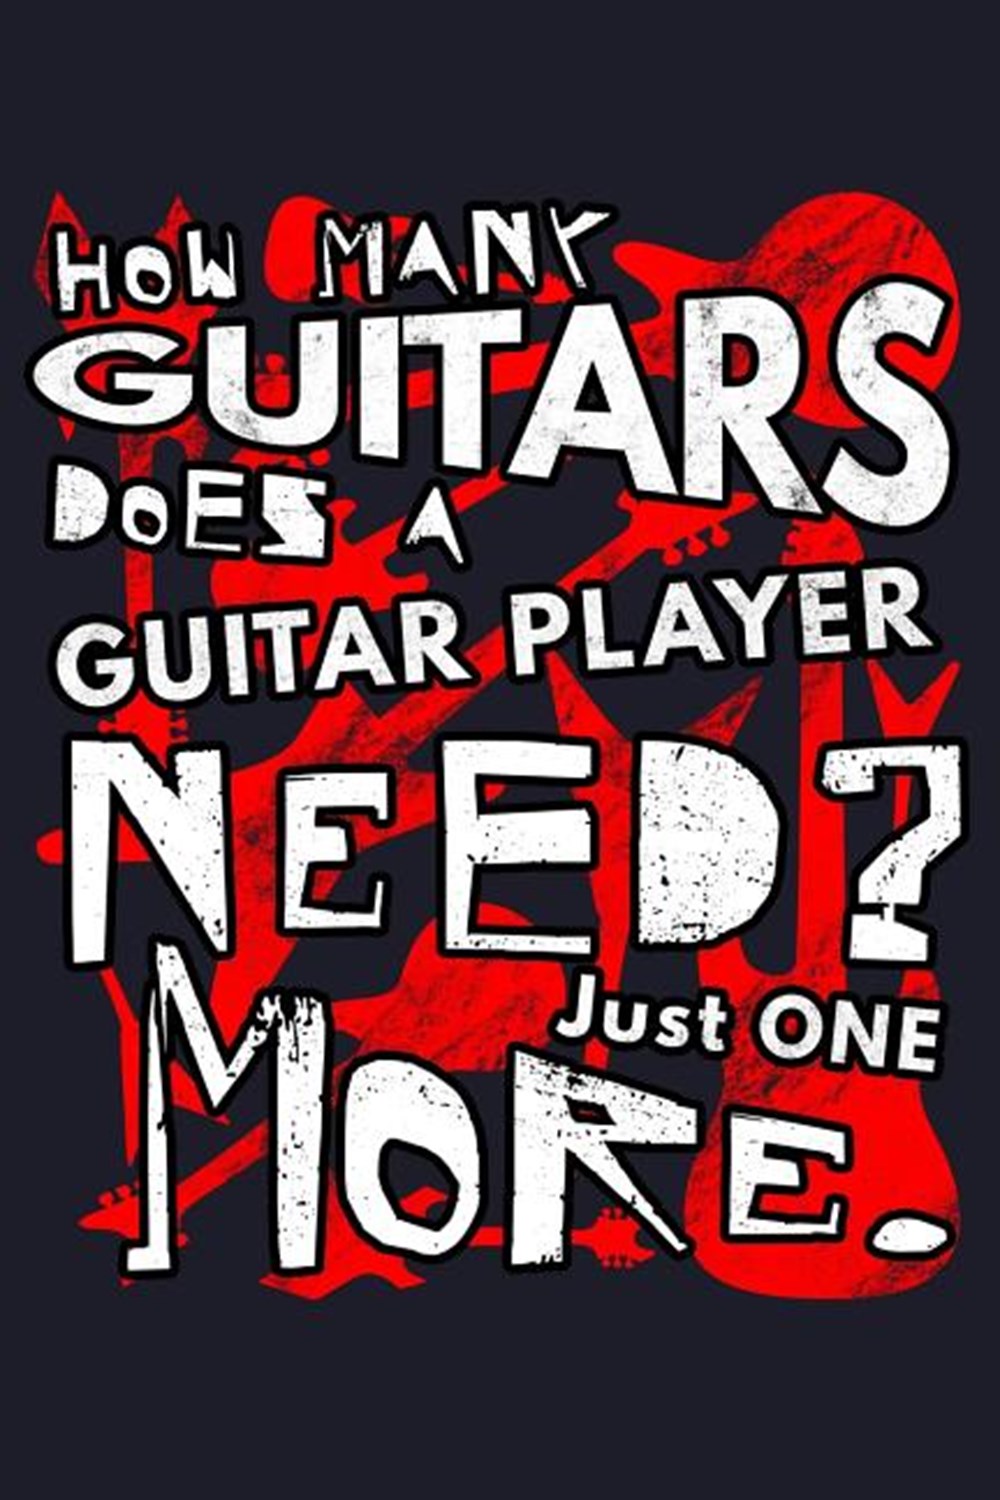 How Many Guitars Does A Guitar Player Need? Just One More. Blank Paper Sketch Book - Artist Sketch P